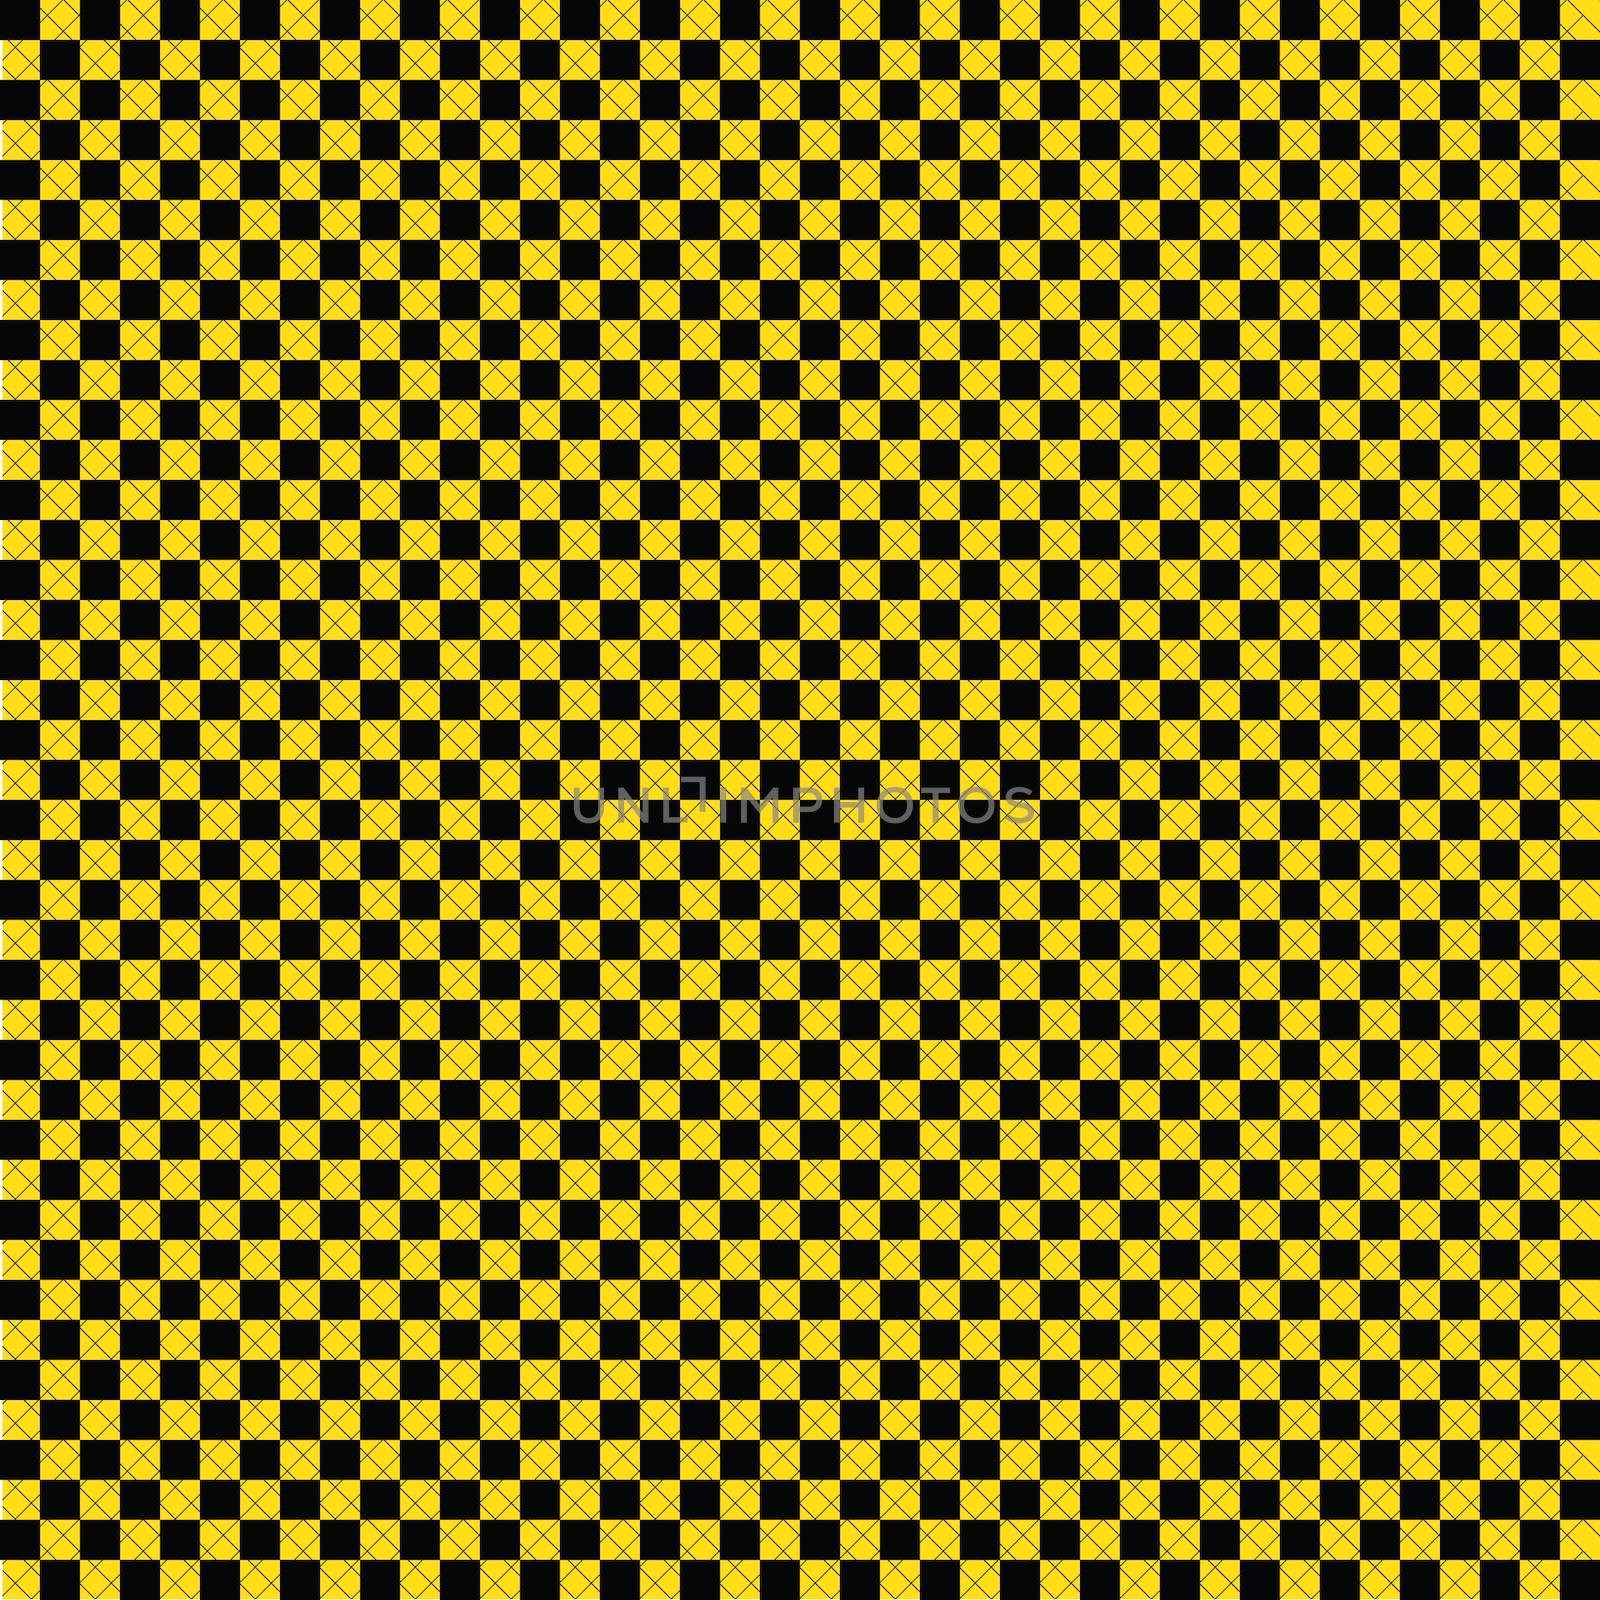 Illustrated Seamless Texture - Chequer